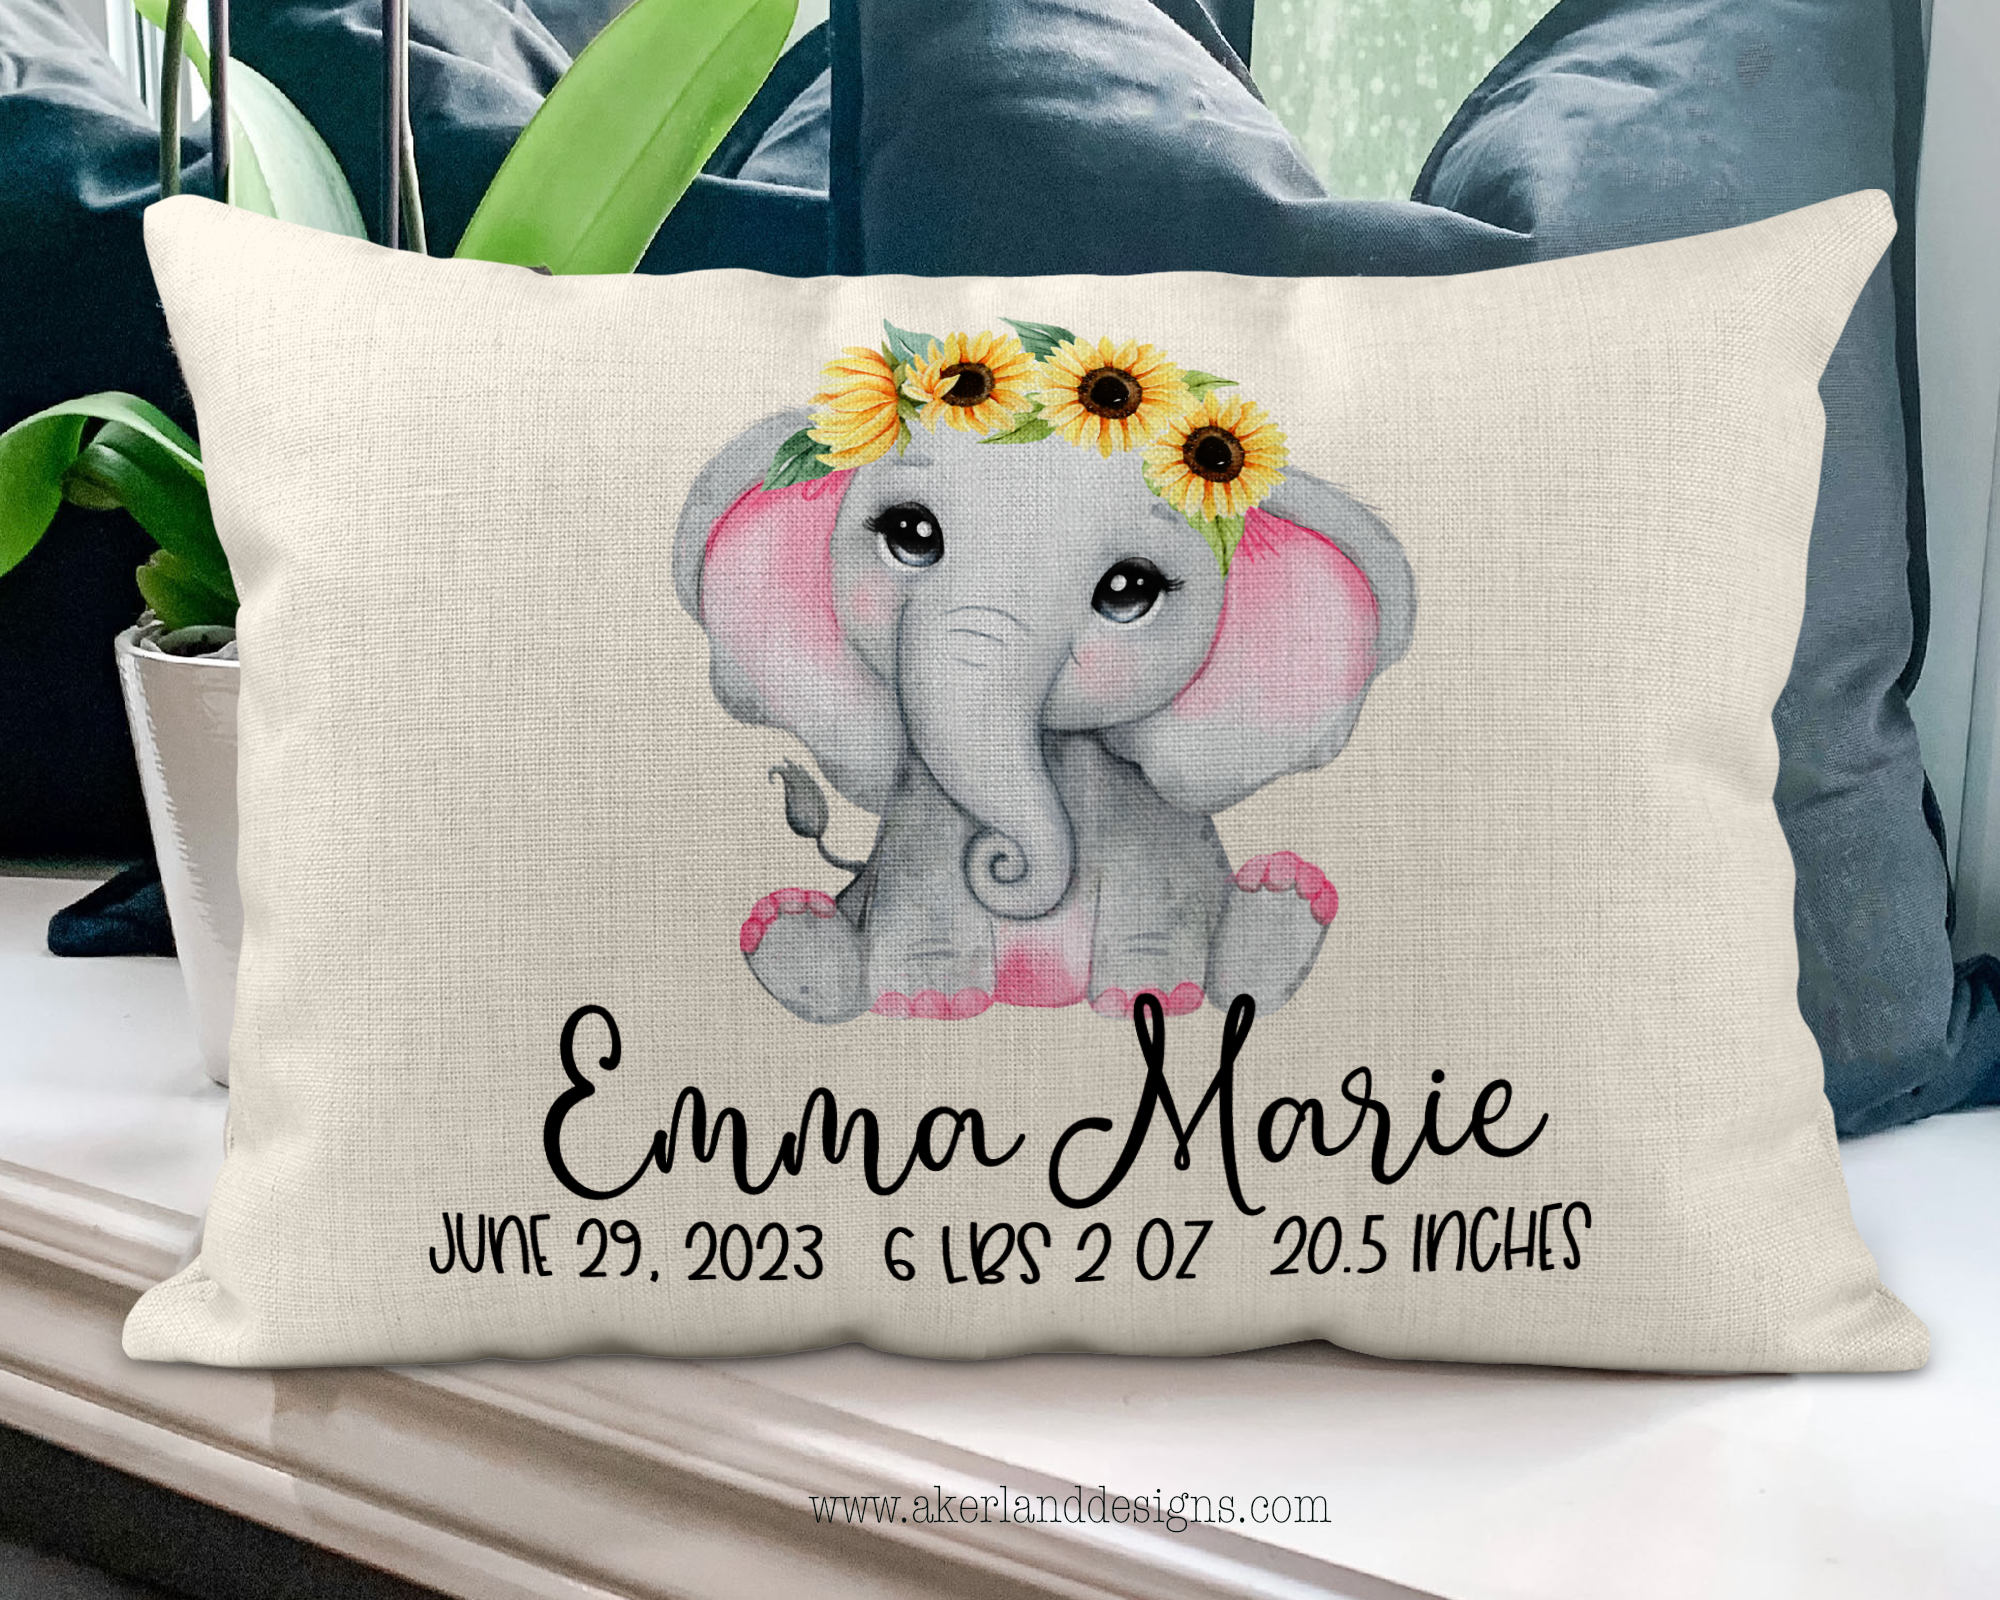 Birth Announcement Pillow with Name, Date and Details